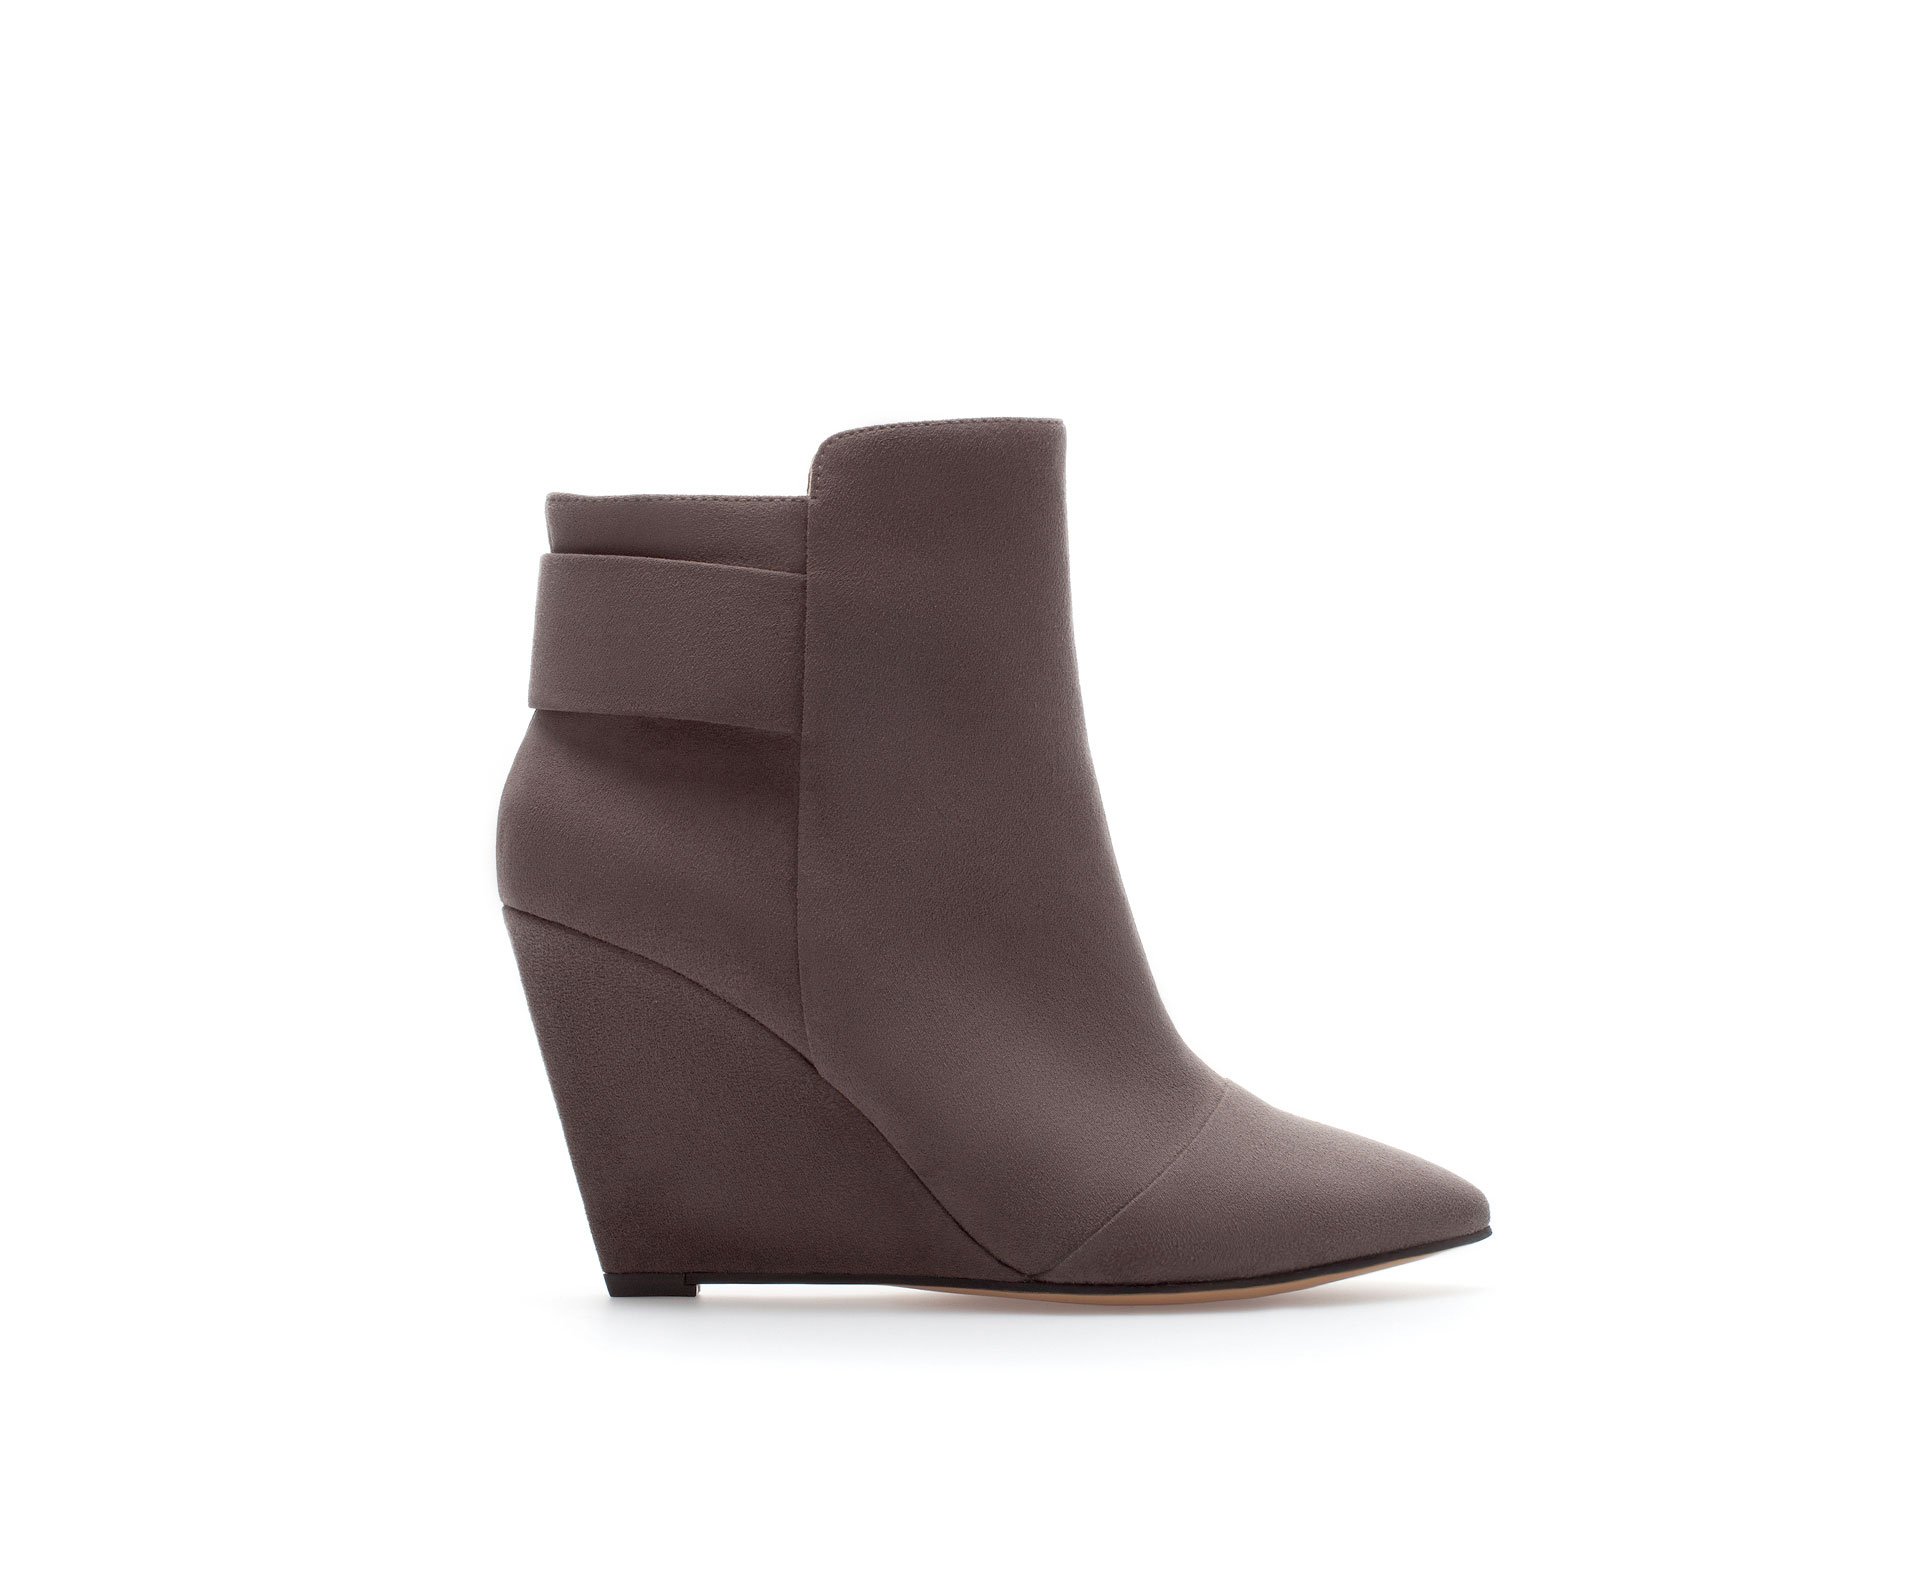 Zara Wedge Ankle Boot in Gray (Grey)